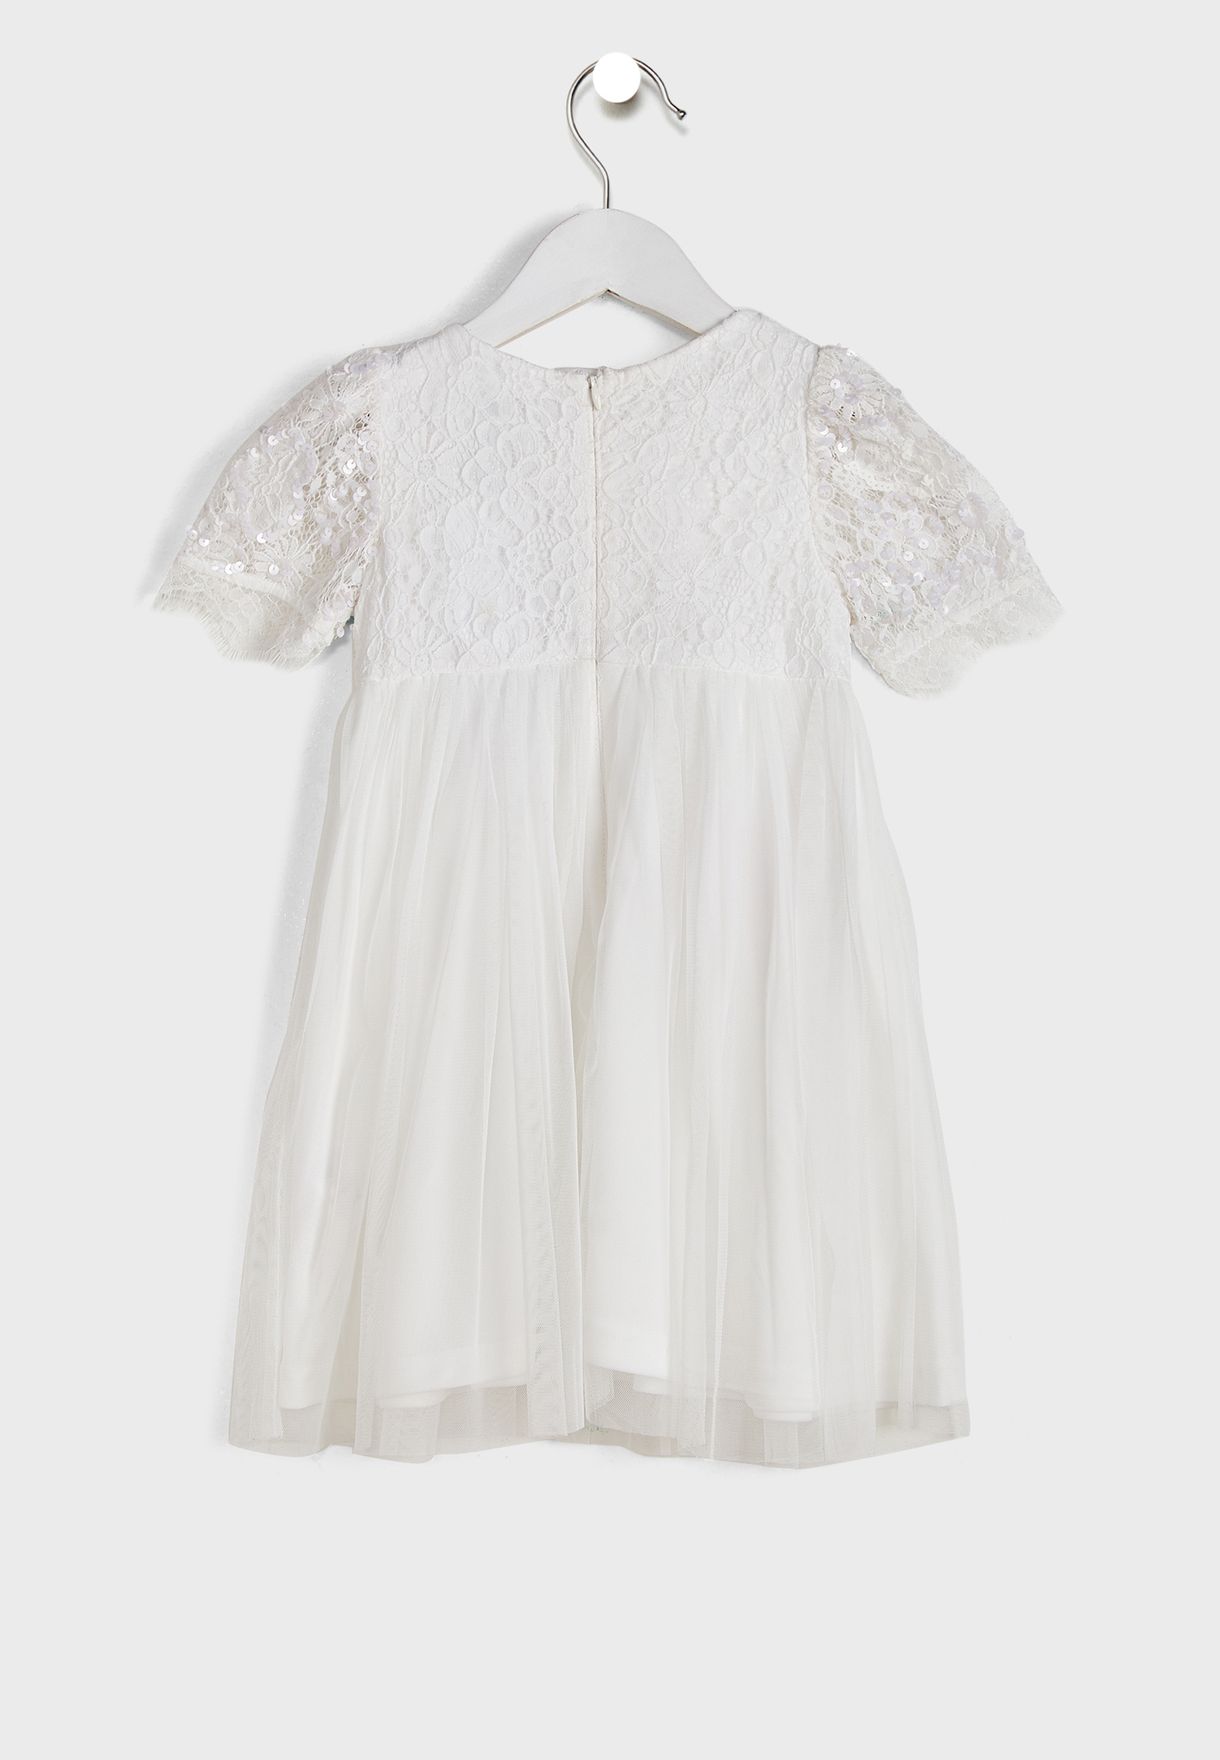 Youth Sequin And Lace Party Dress